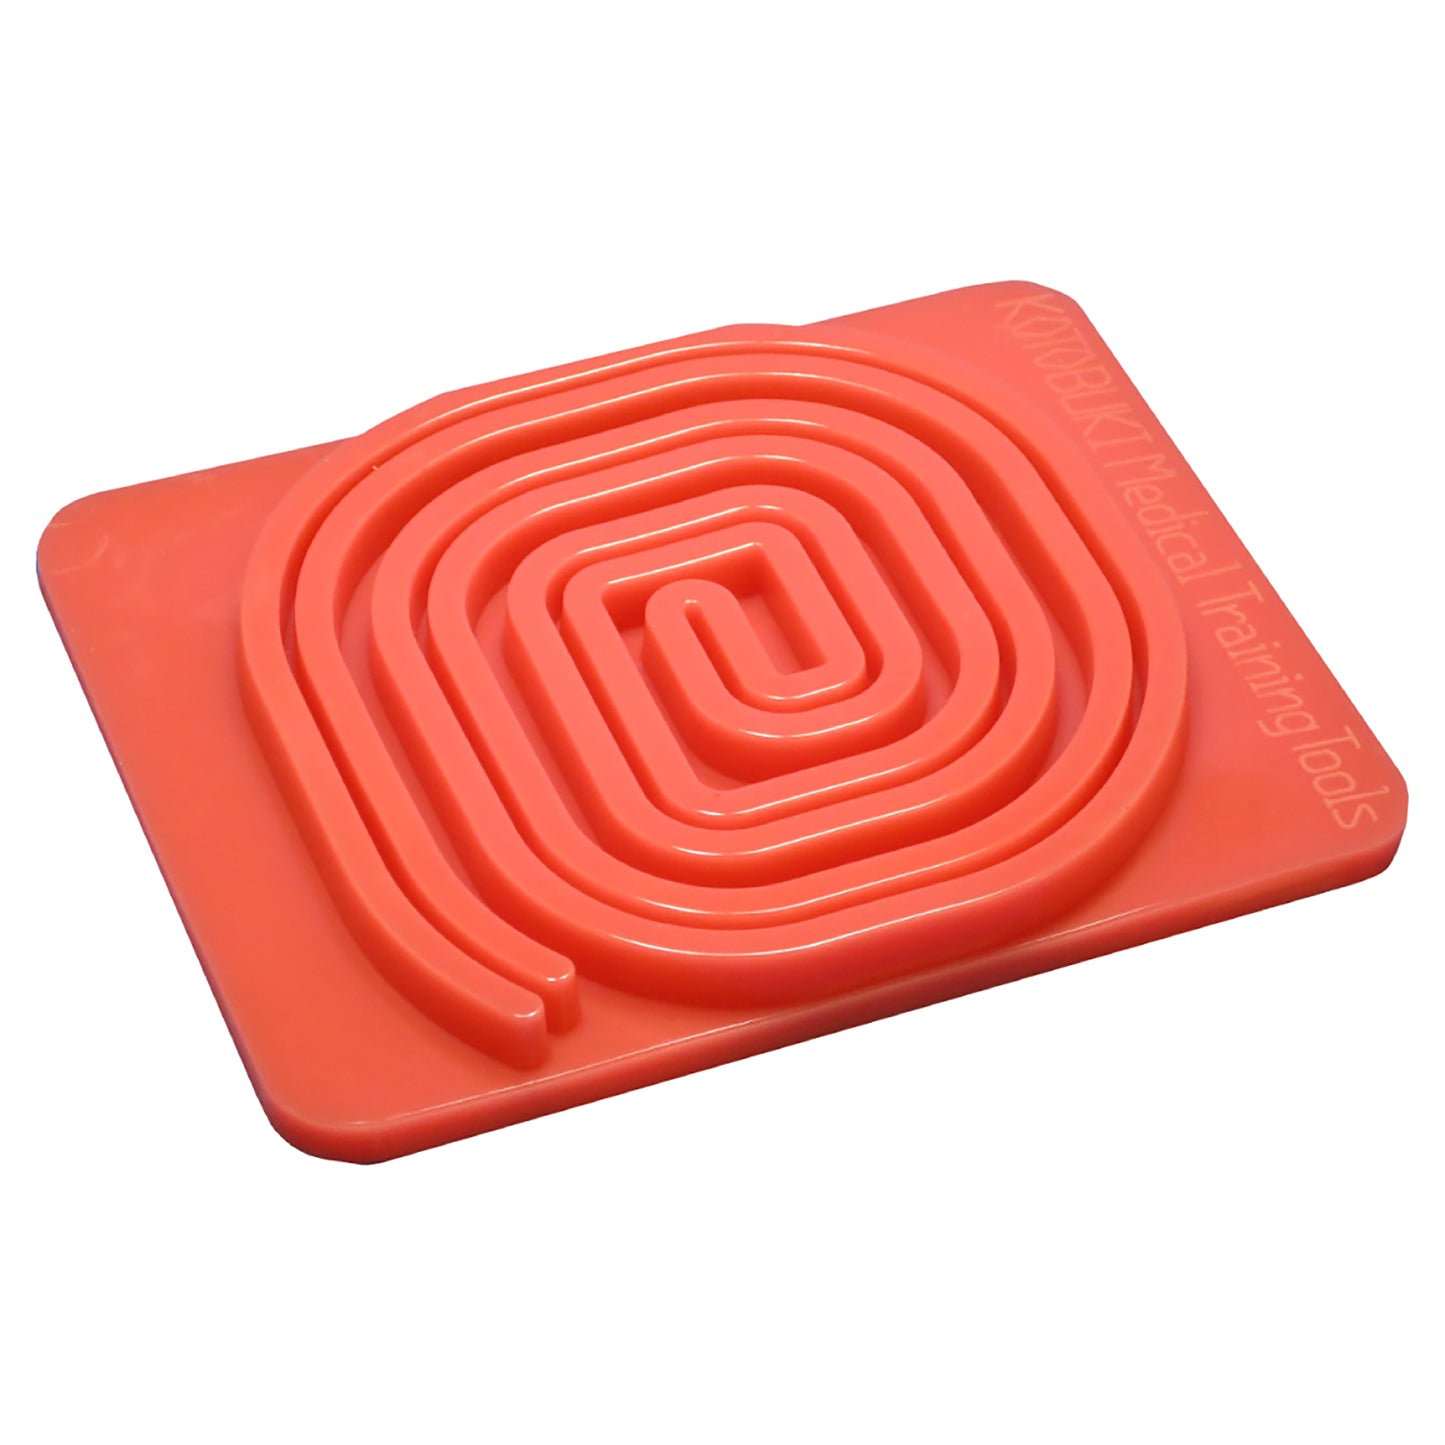 The red Training Pad Swirl against a white background. 